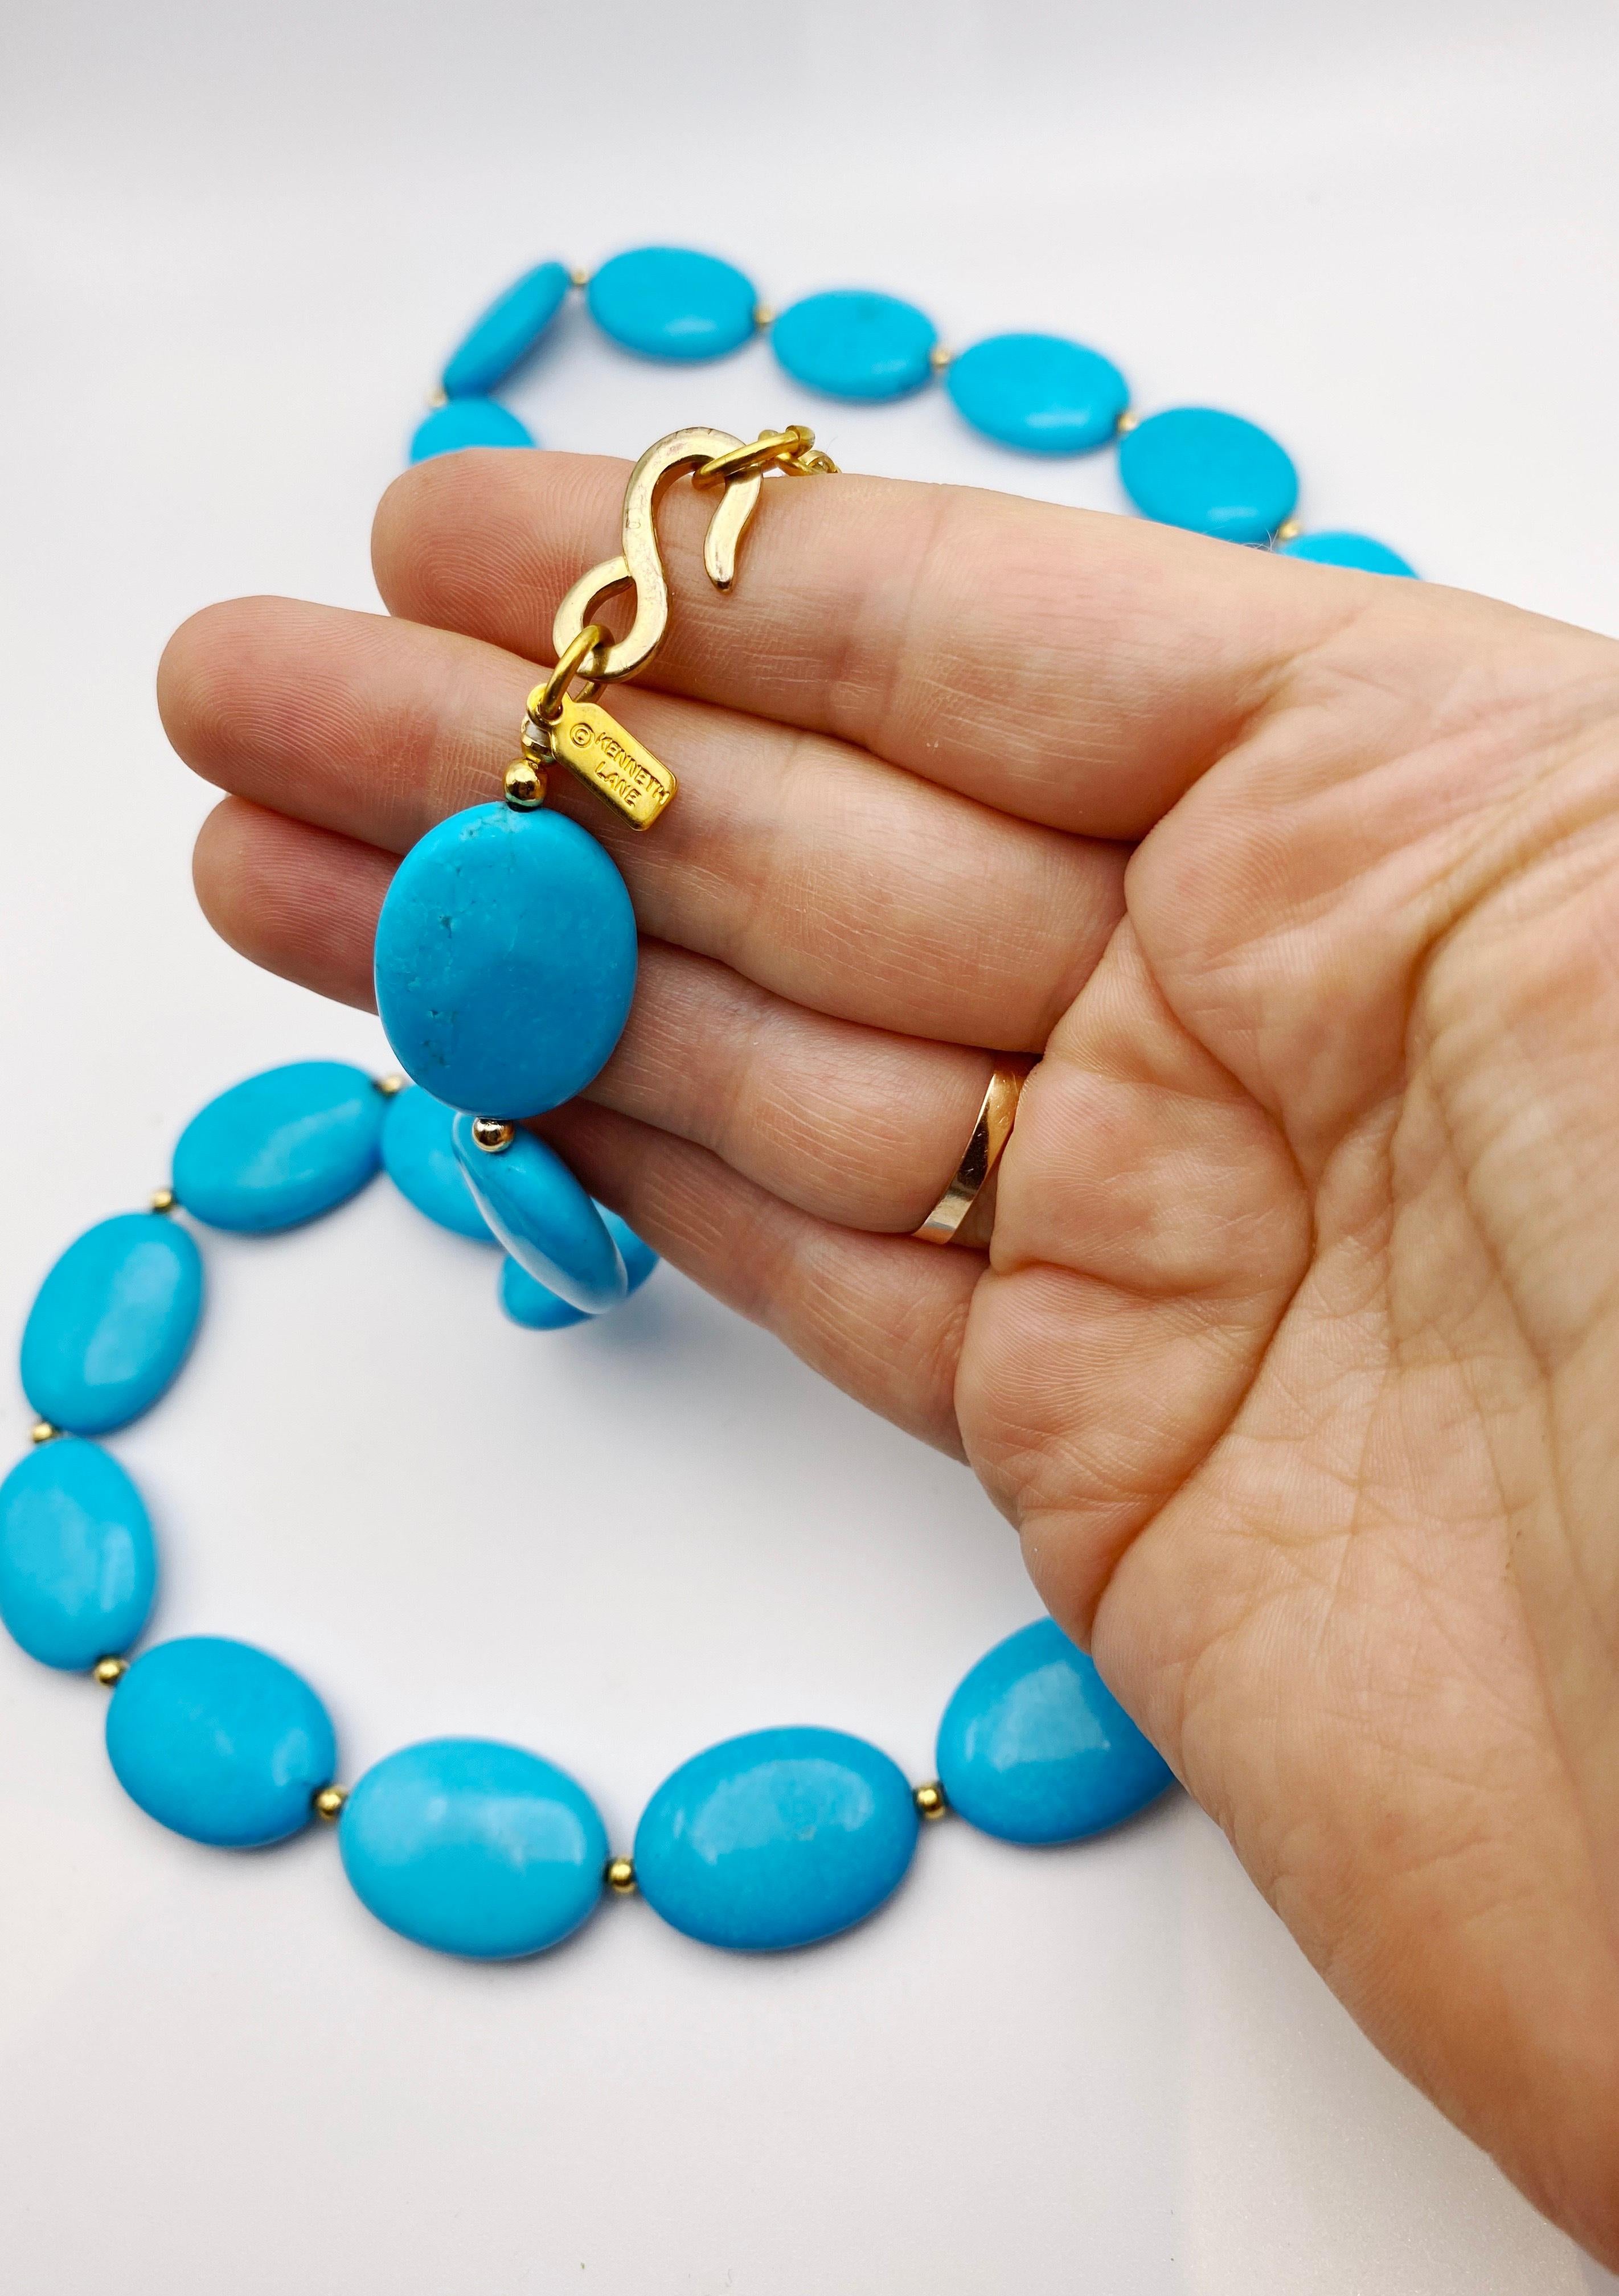 Kenneth Jay Lane Faux Turquoise Bead Necklace In Good Condition For Sale In BALMAIN, AU